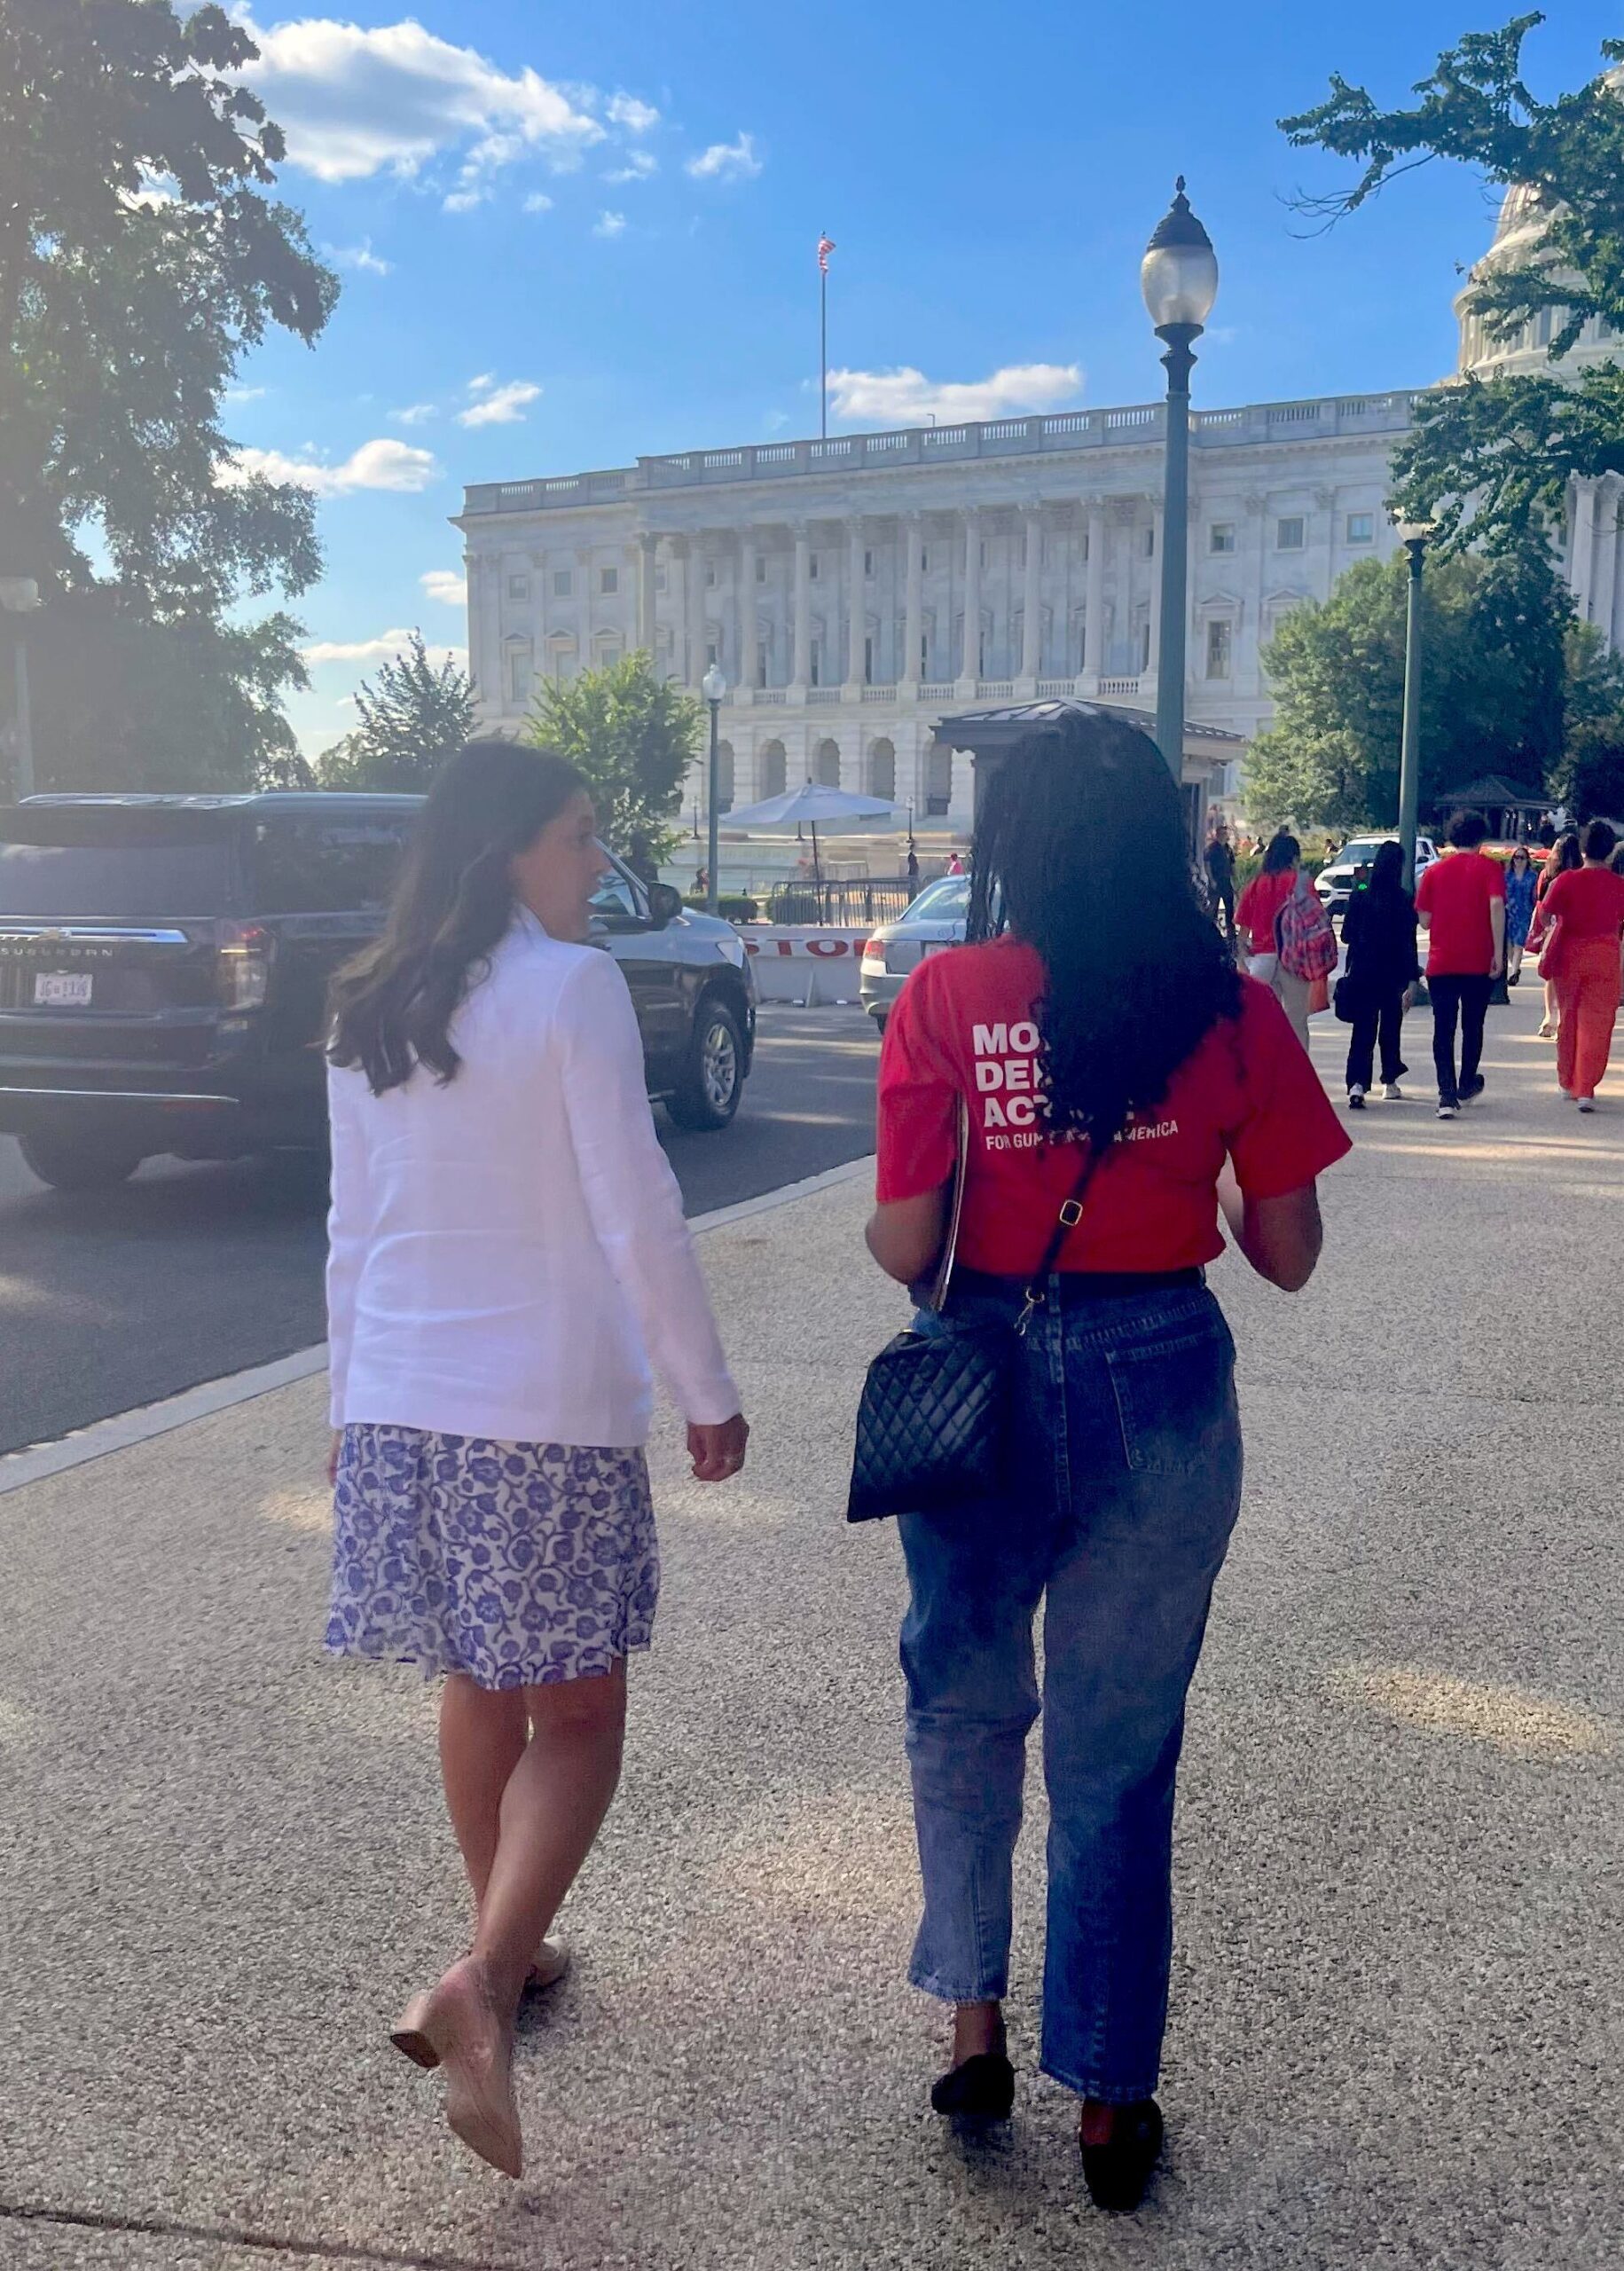 Two people are pictured from the back, walking toward the Capitol Building. Rep. Stephanie Bice has long dark hair that is curled; she wears a white linen blazer and a white-and-blue floral patterned dress. JeKia Harrison is a Black woman with dark braids, a red Moms Demand Action t-shirt, blue jeans, and a dark purse. 